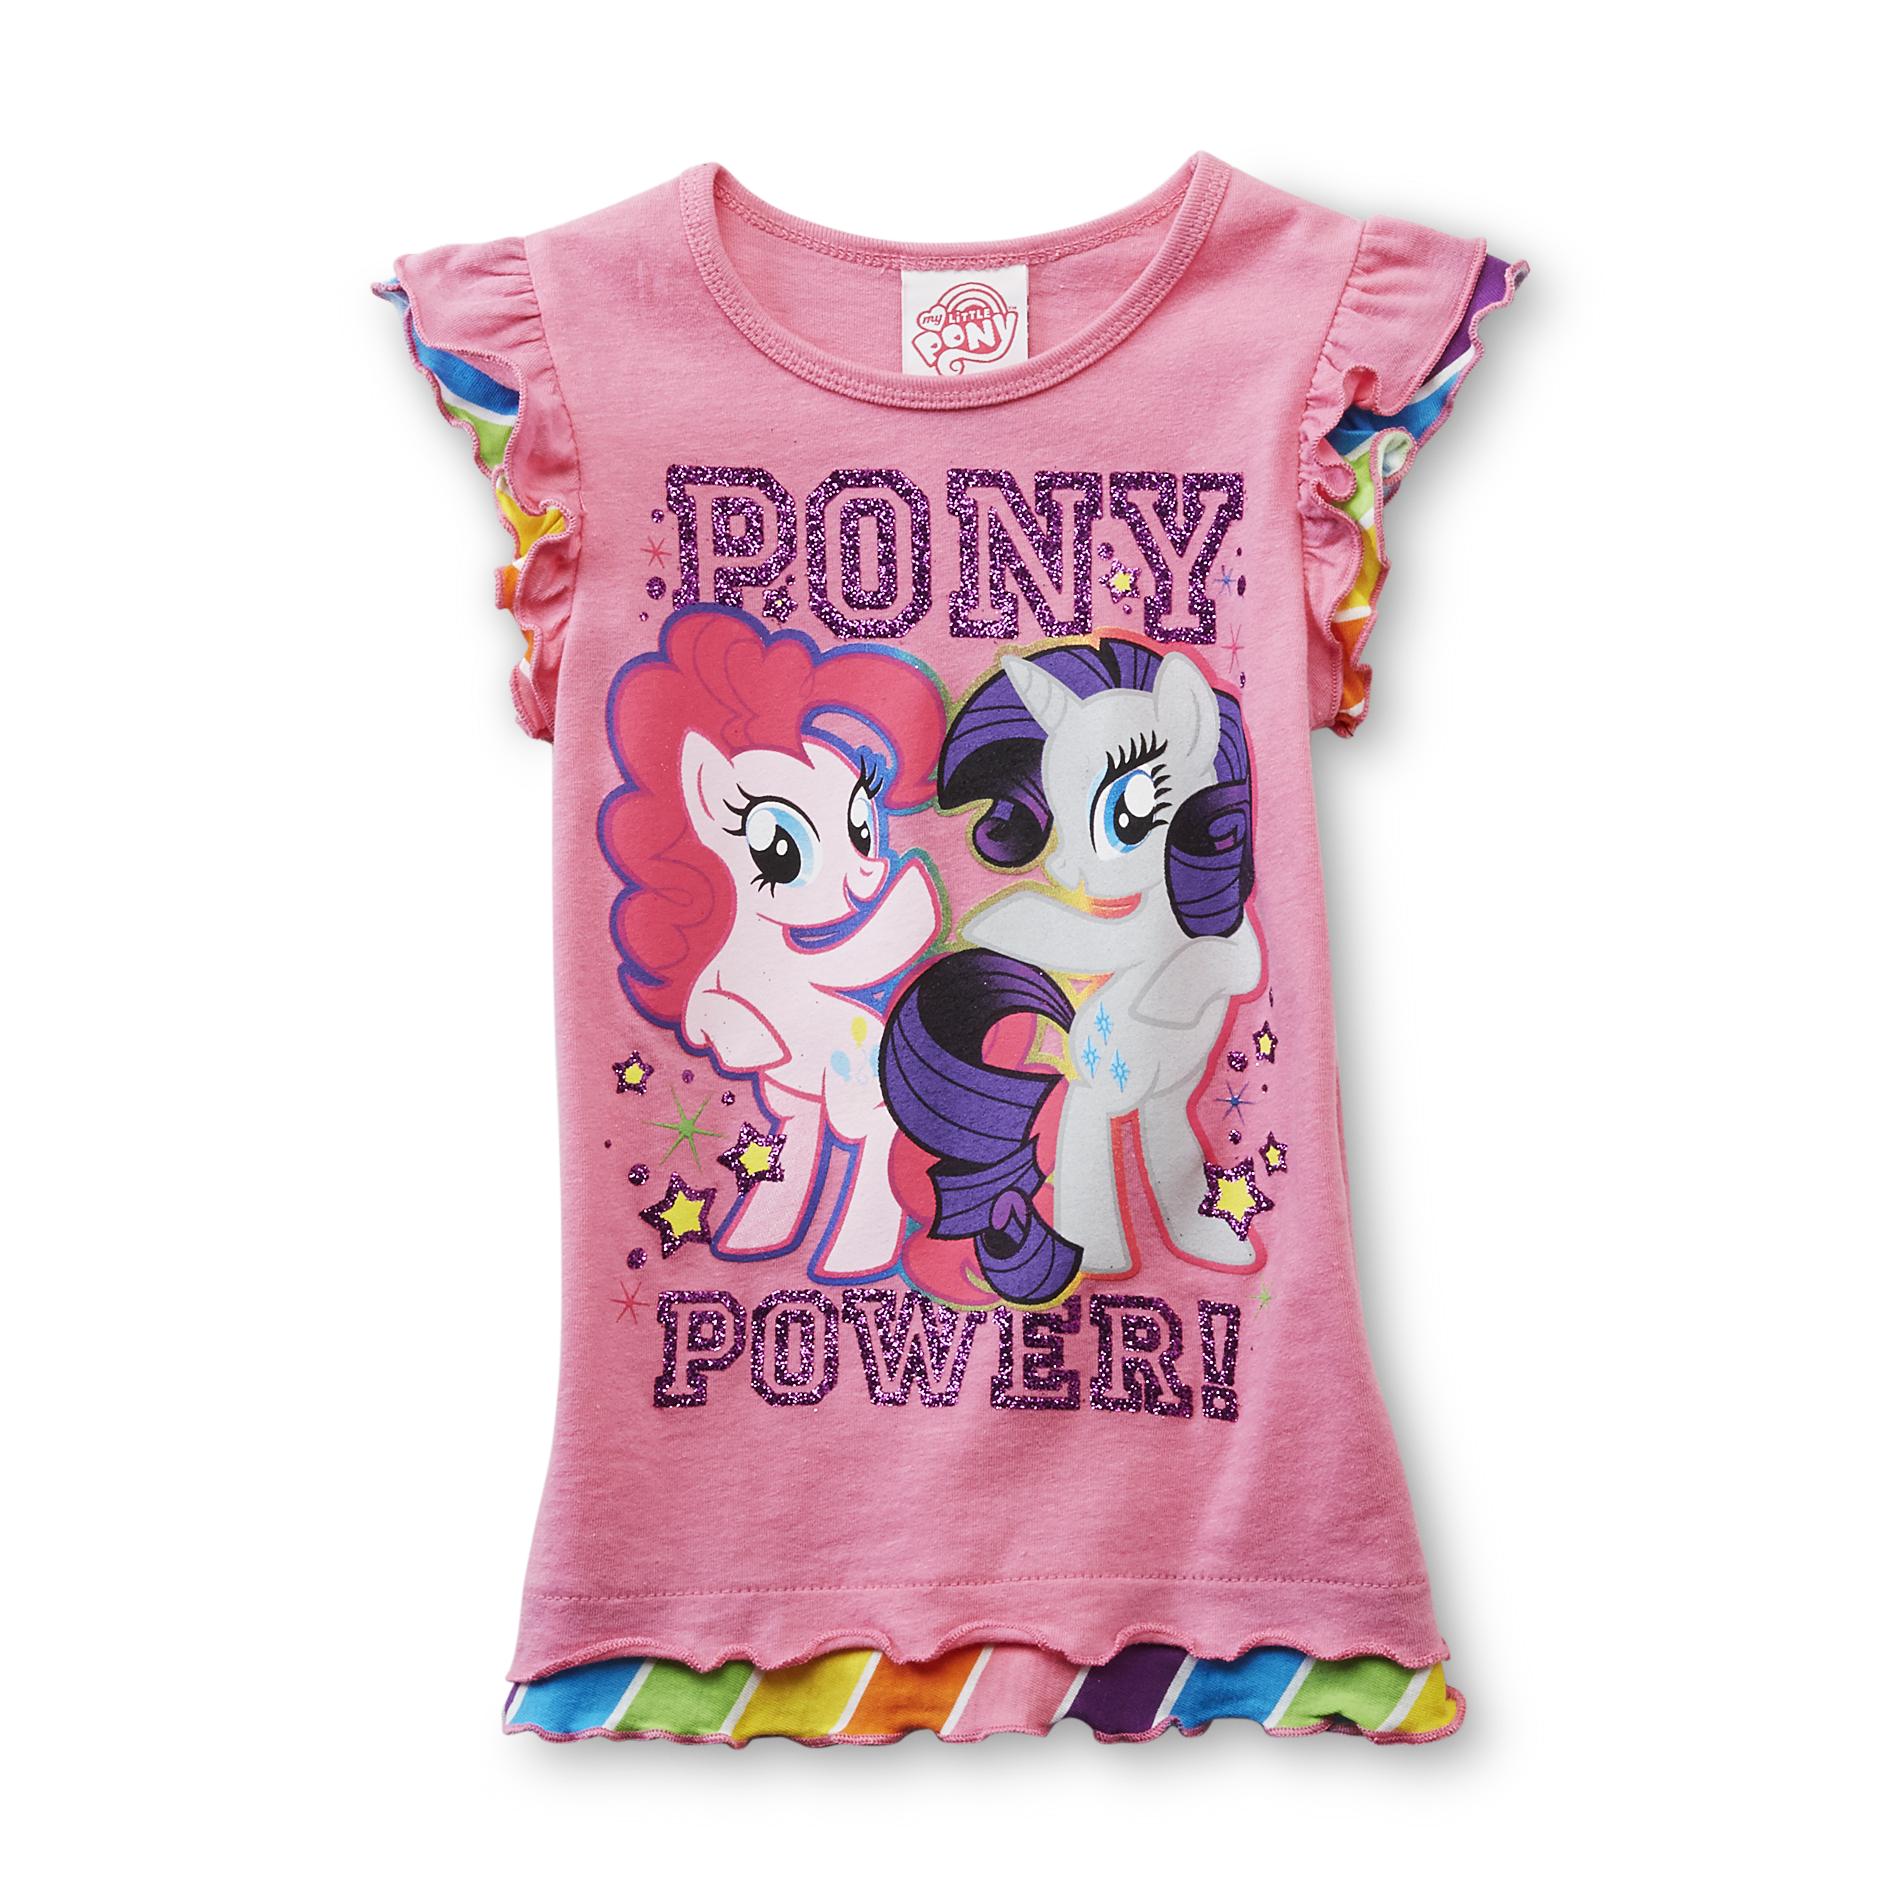 My Little Pony Girl's Layered-Look Graphic T-Shirt - Pony Power